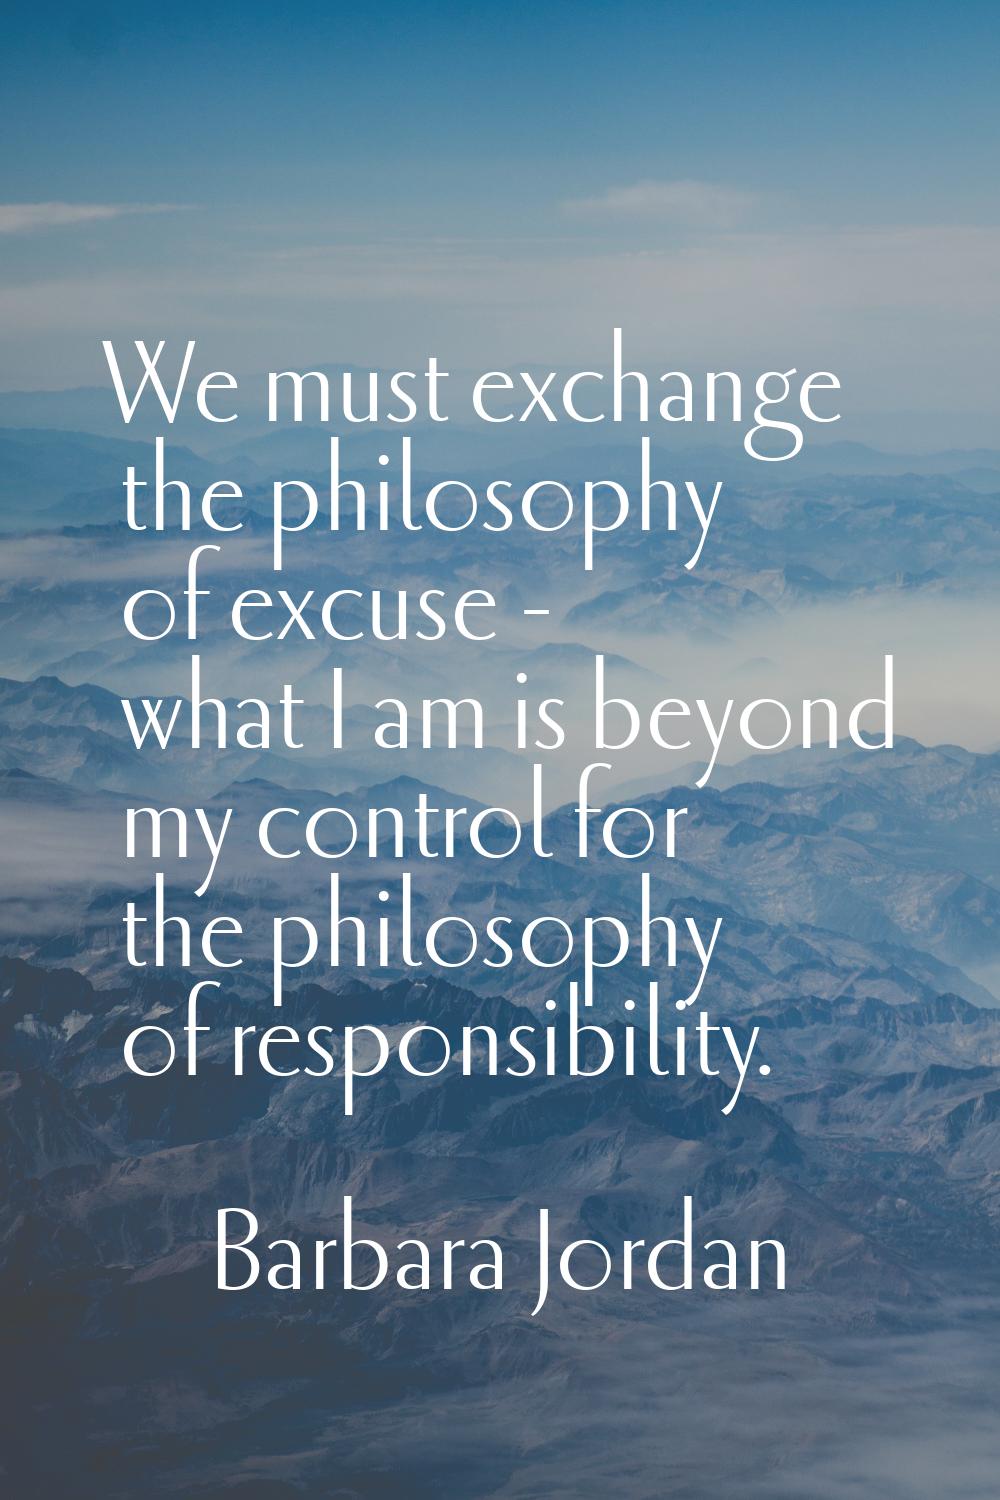 We must exchange the philosophy of excuse - what I am is beyond my control for the philosophy of re